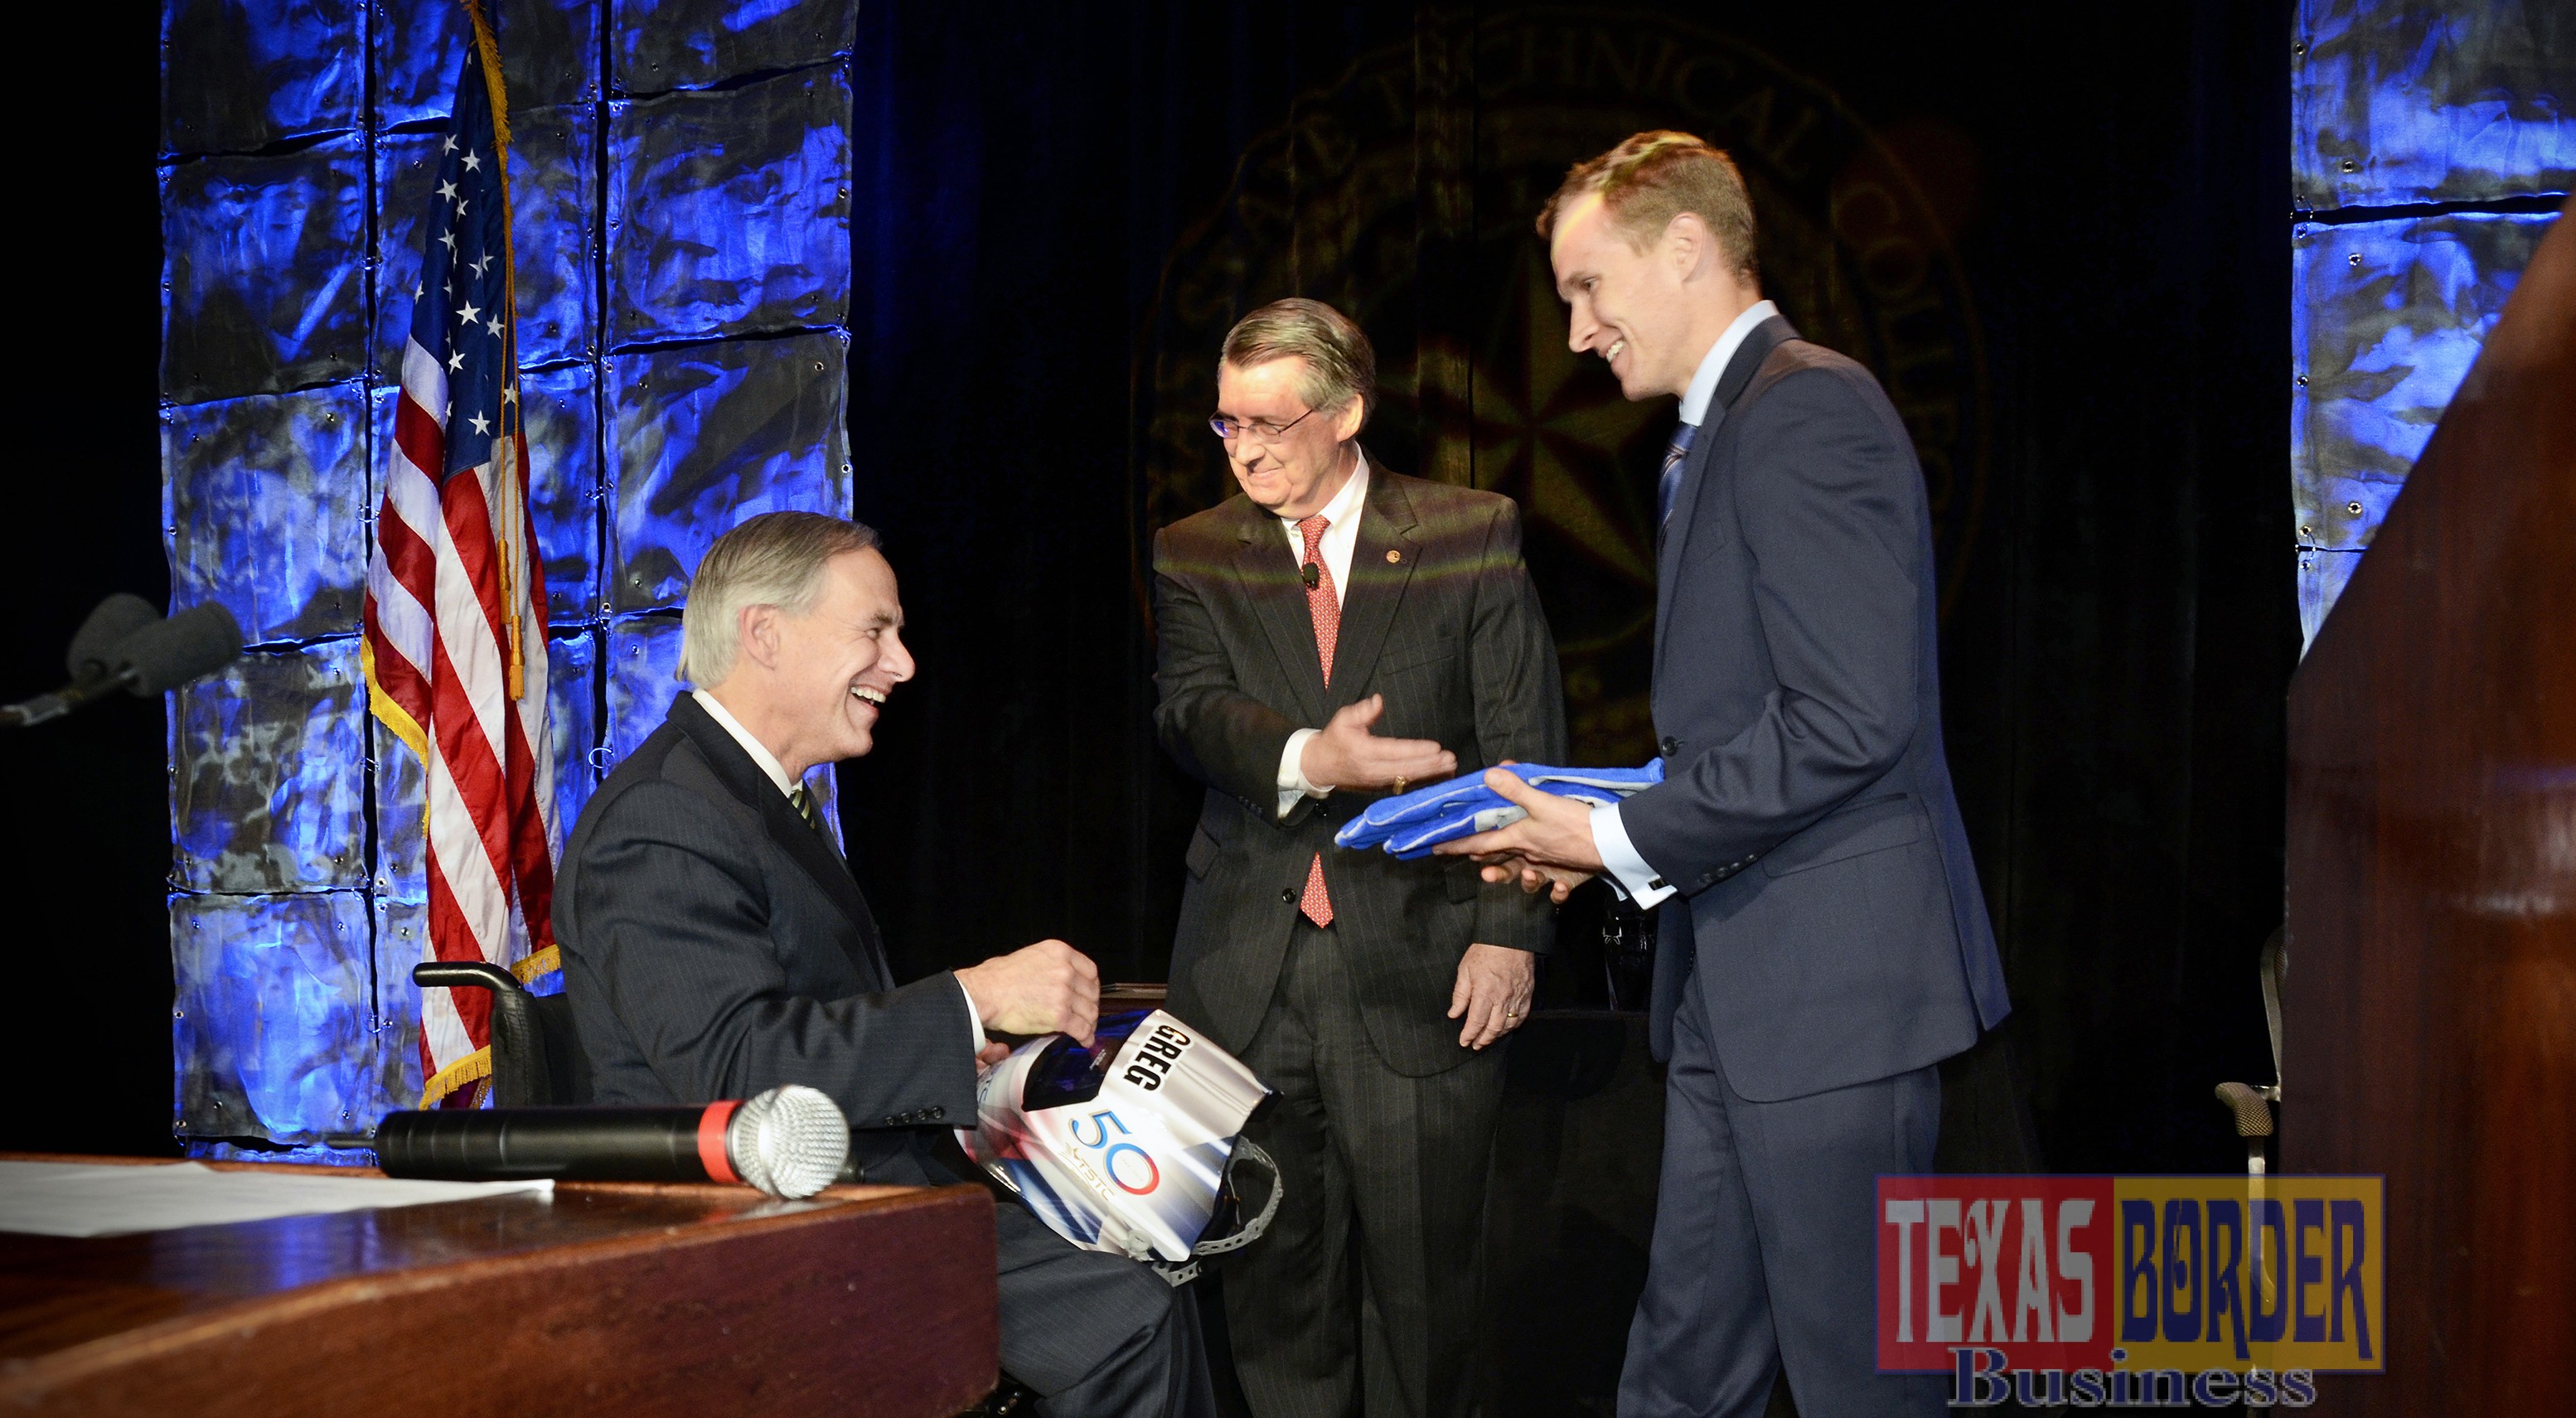 TSTC graduate Justin Friend and Chancellor Michael L. Reeser present Governor Greg Abbott with a personalized welding helmet and heat-resistant gloves at TSTC's 50th Anniversary Celebration.